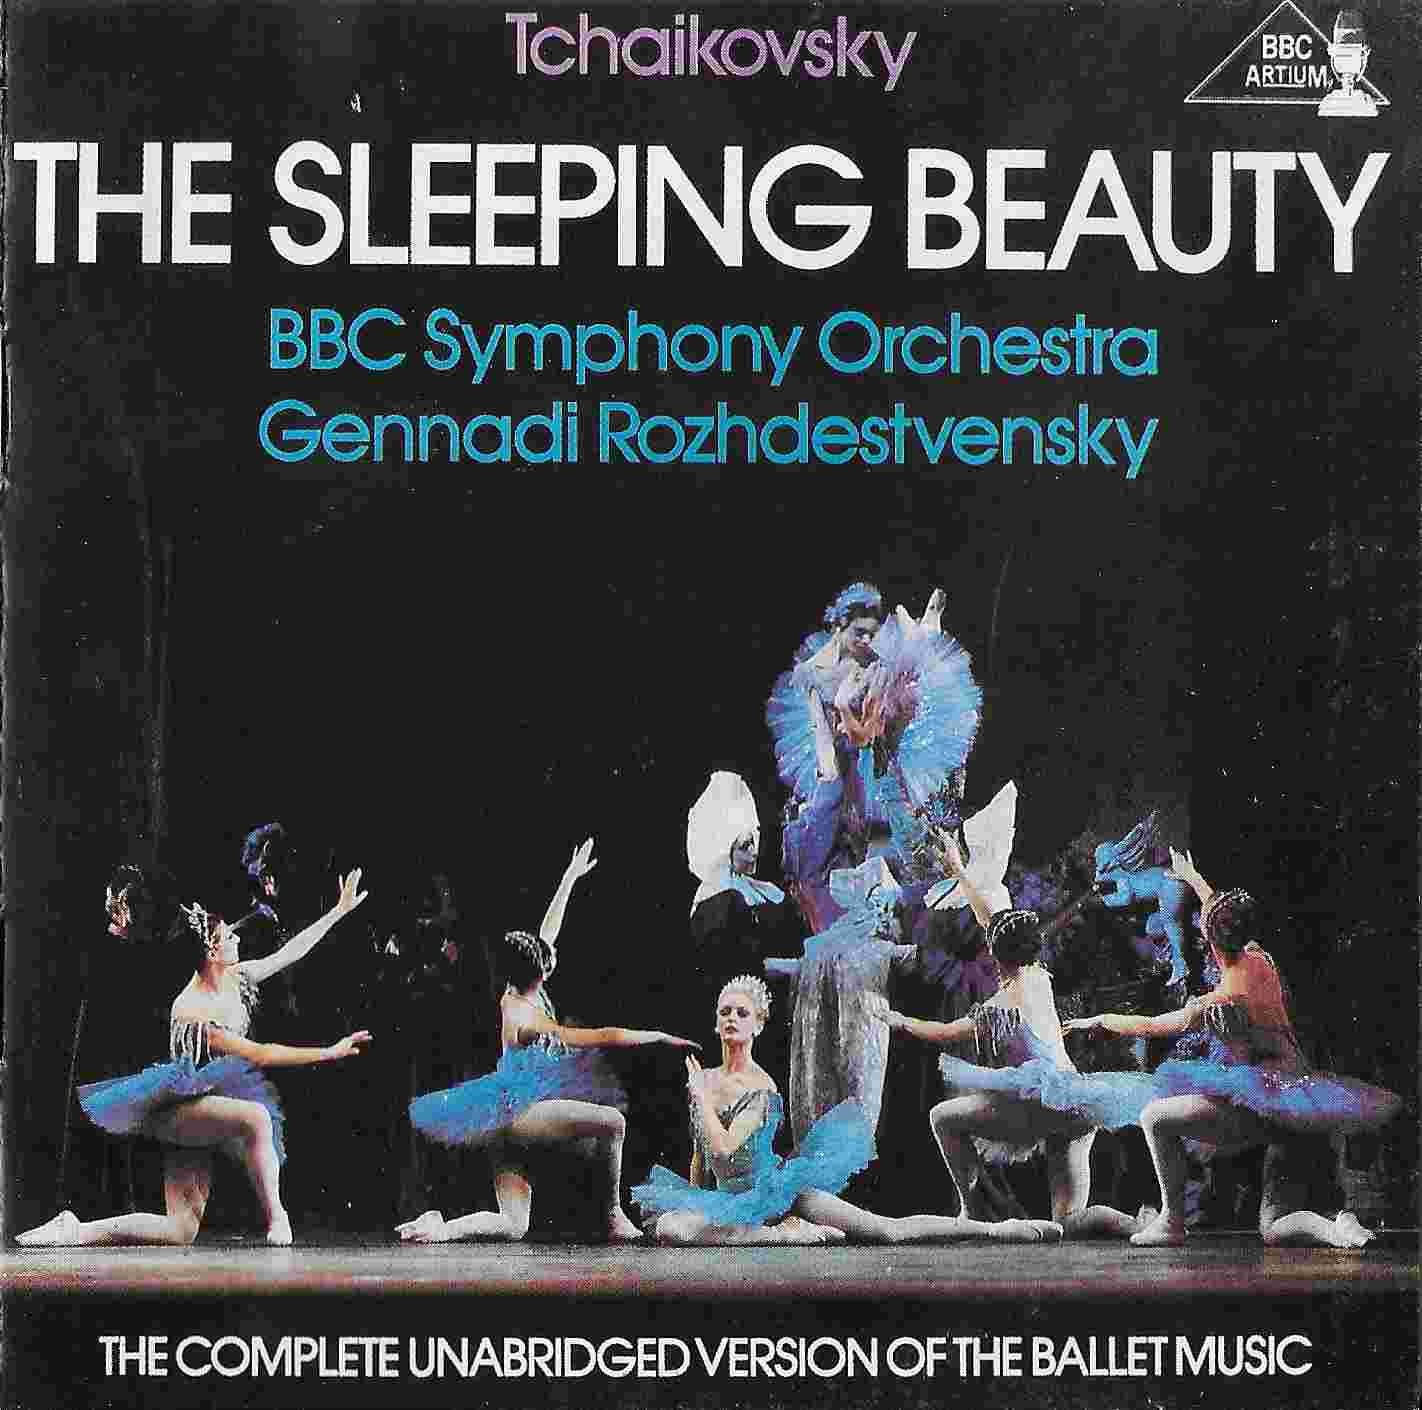 Picture of BBCCD3003X The sleeping beauty - Digital version by artist Tchaikovsky from the BBC cds - Records and Tapes library